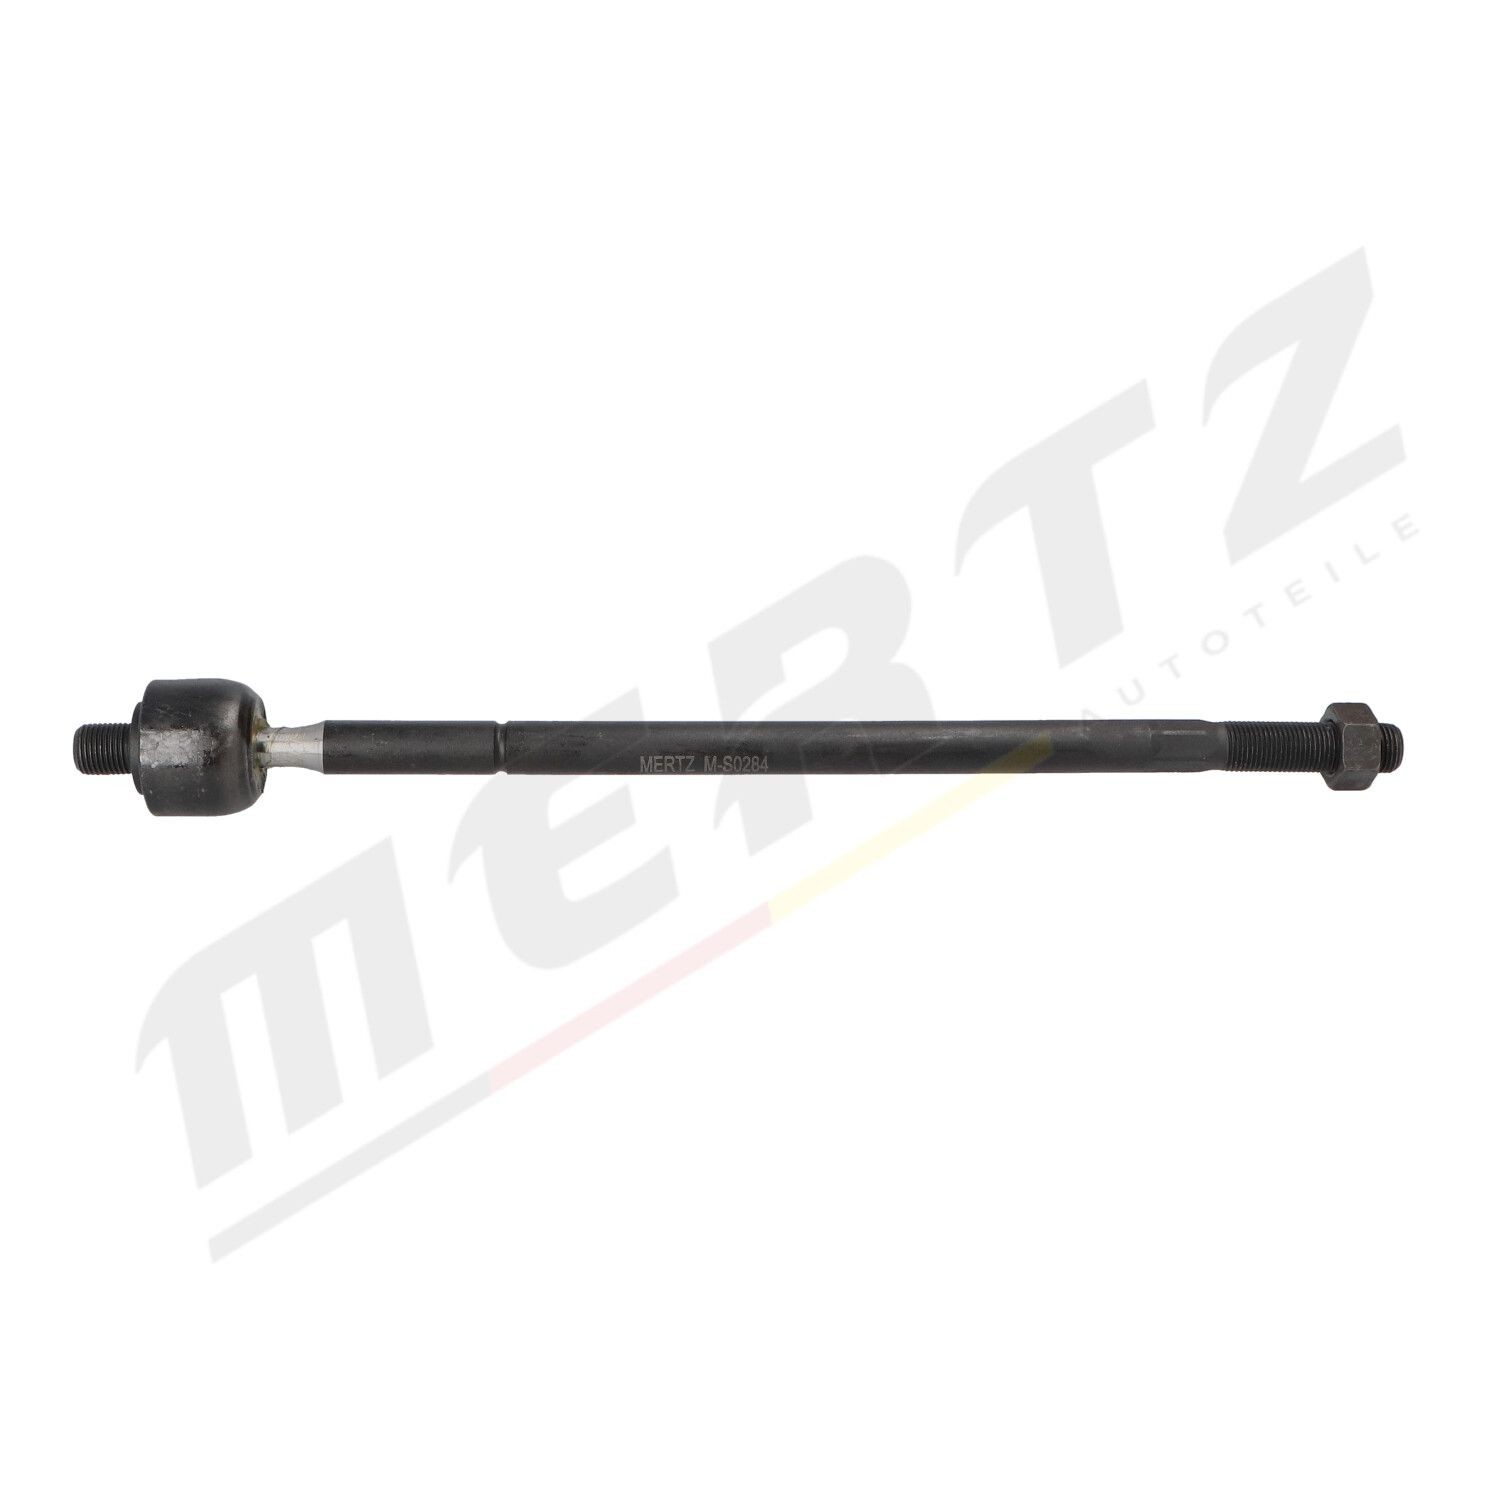 M-S0284 MERTZ Inner track rod end FORD Front Axle Right, 383 mm